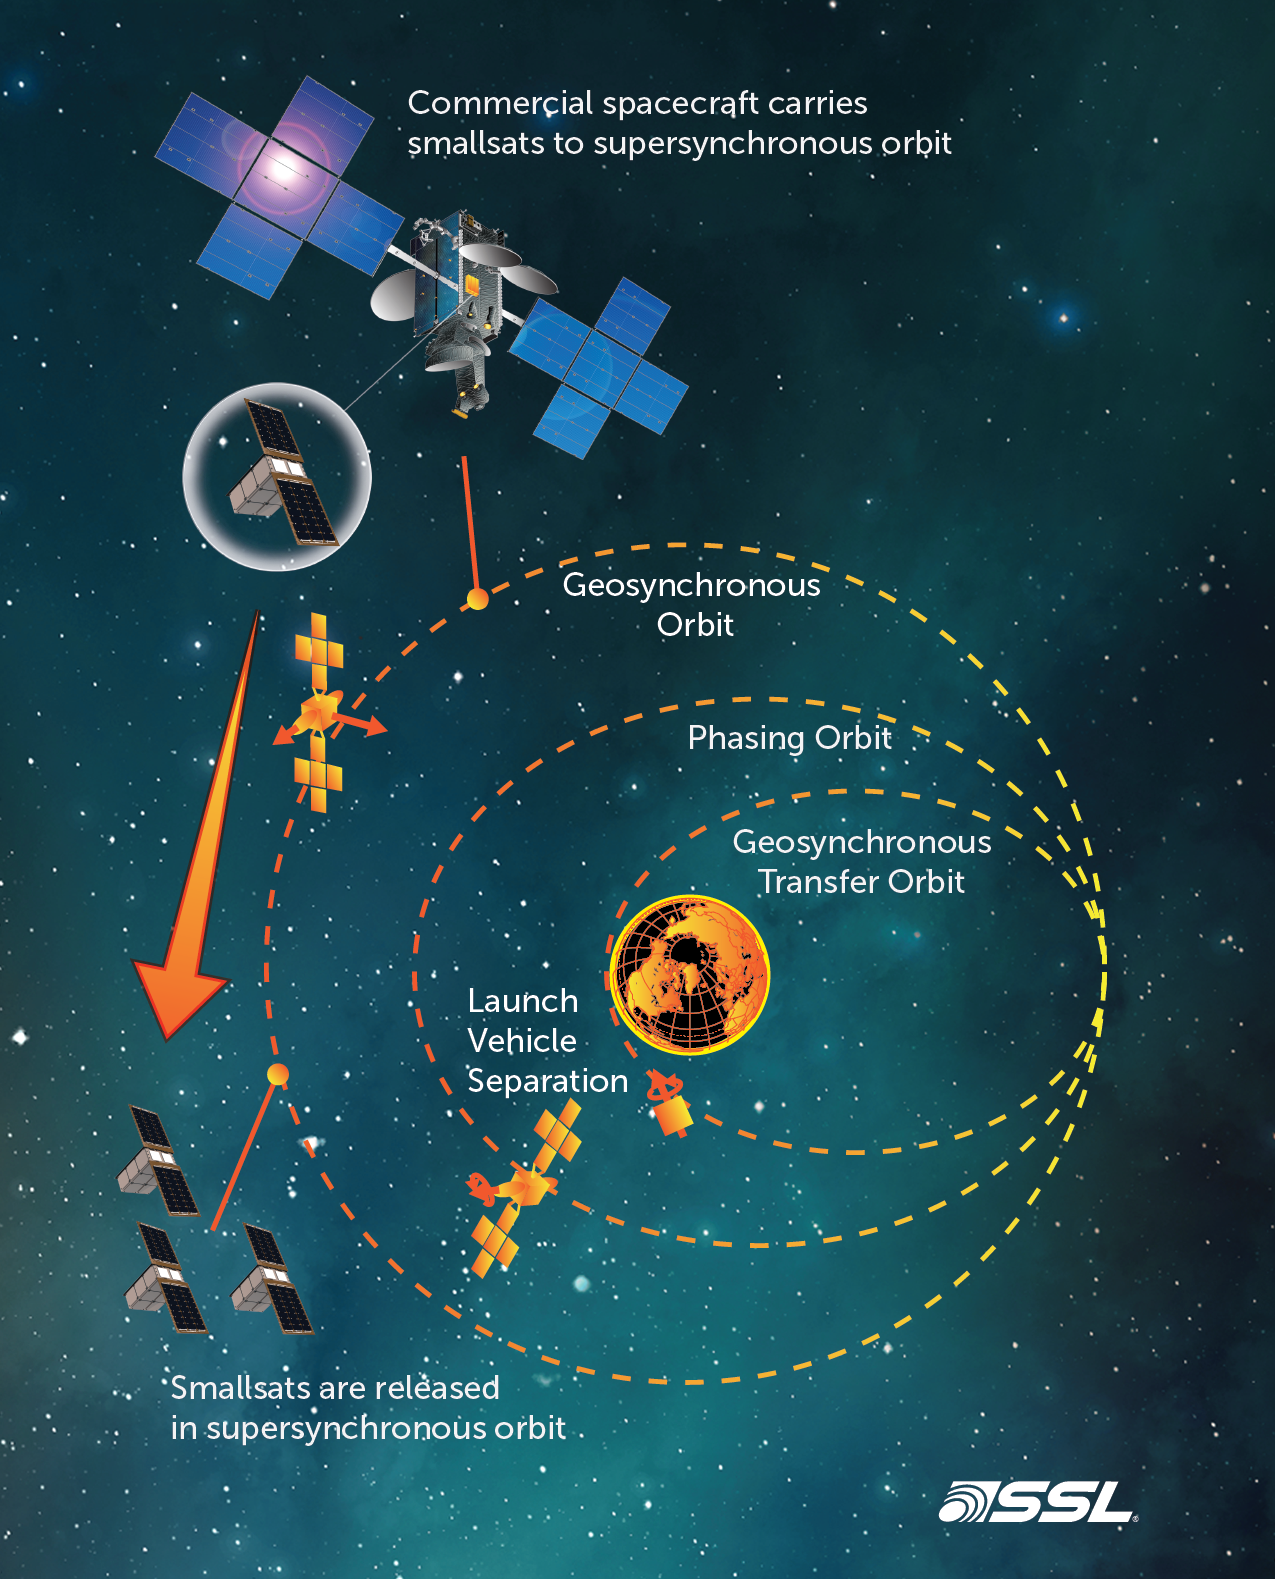 SSL will provide a ride to space for a proposed SmallSat constellation that will study the Sun.